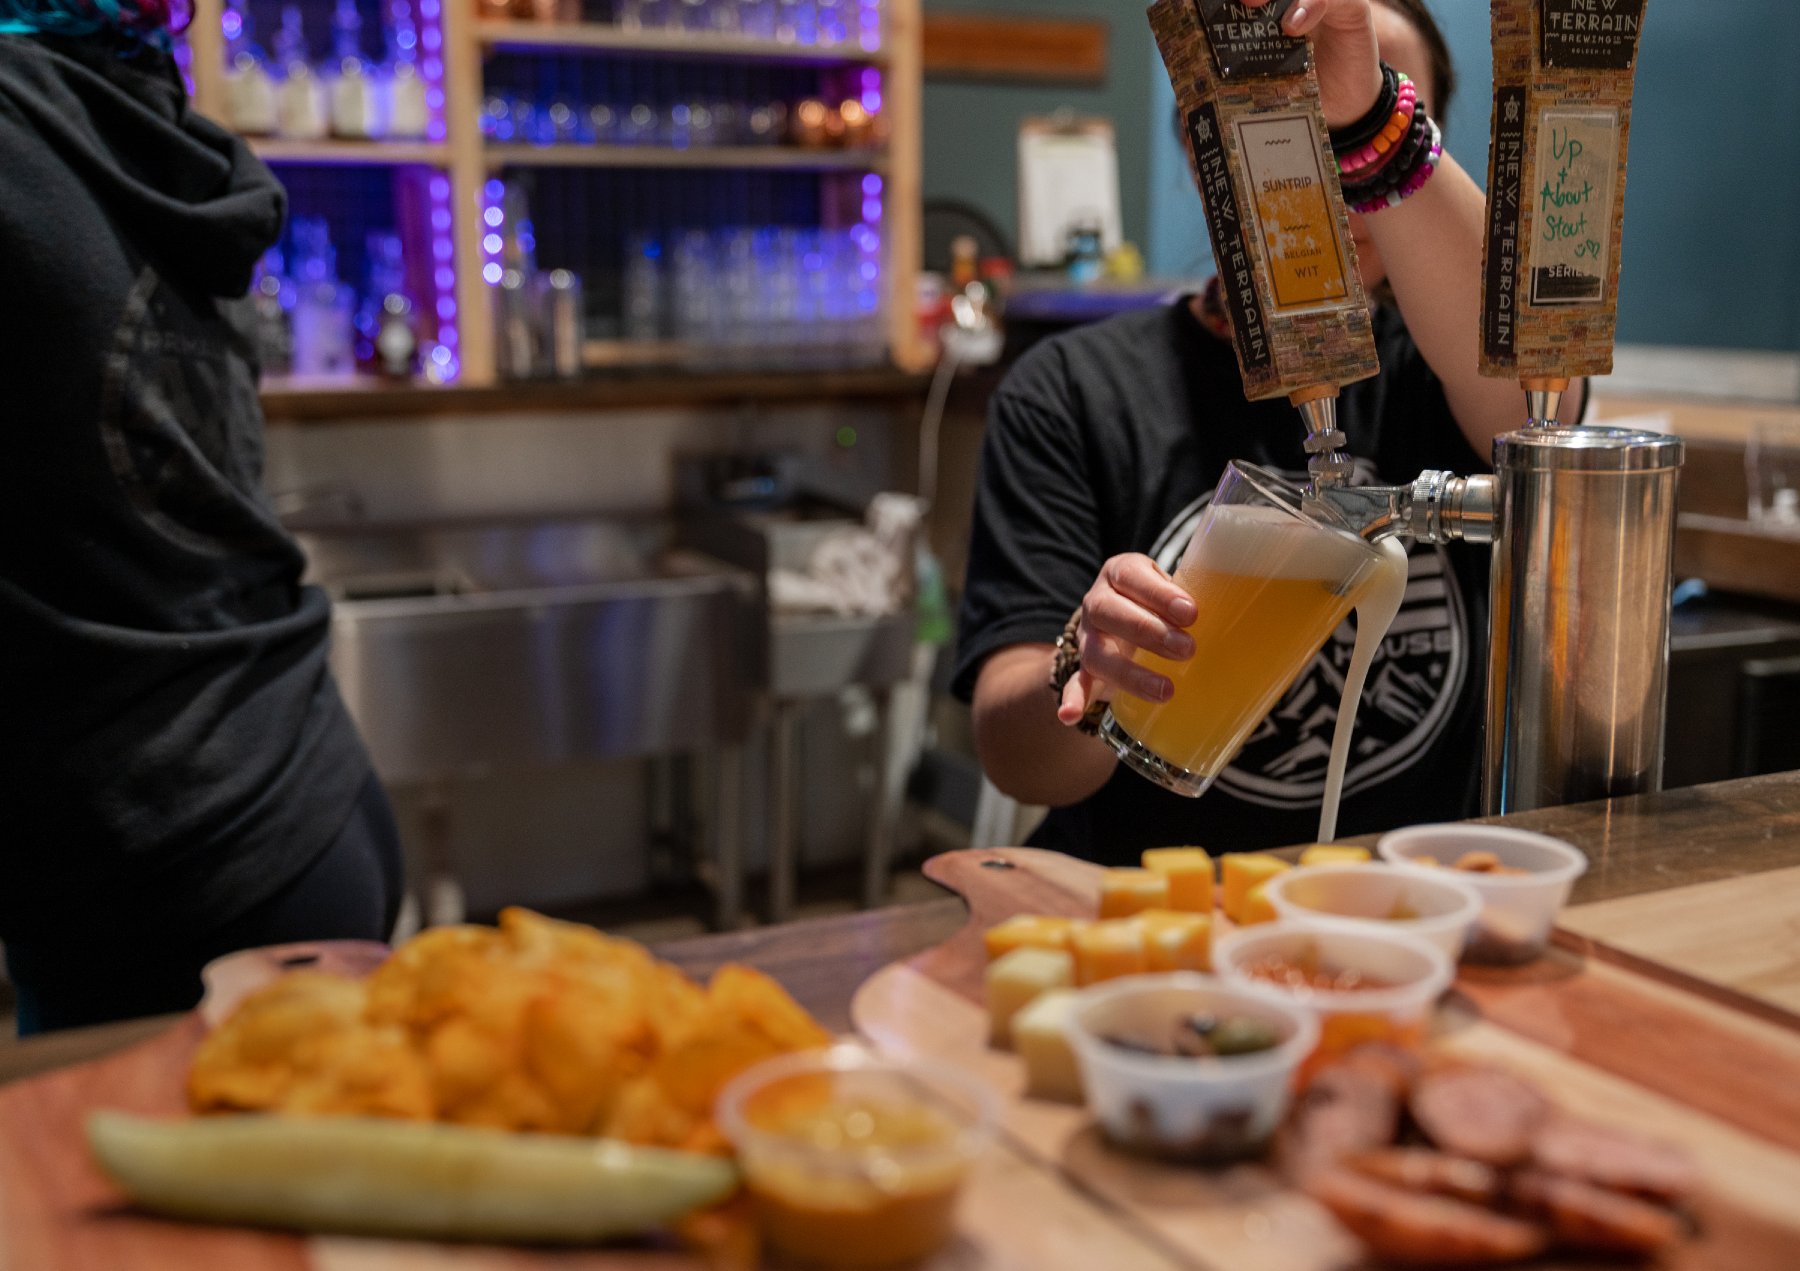 A bartender draws a glass of draft beer with sausage, chips, a pickle, cheese, and dipping sauces in the foreground.